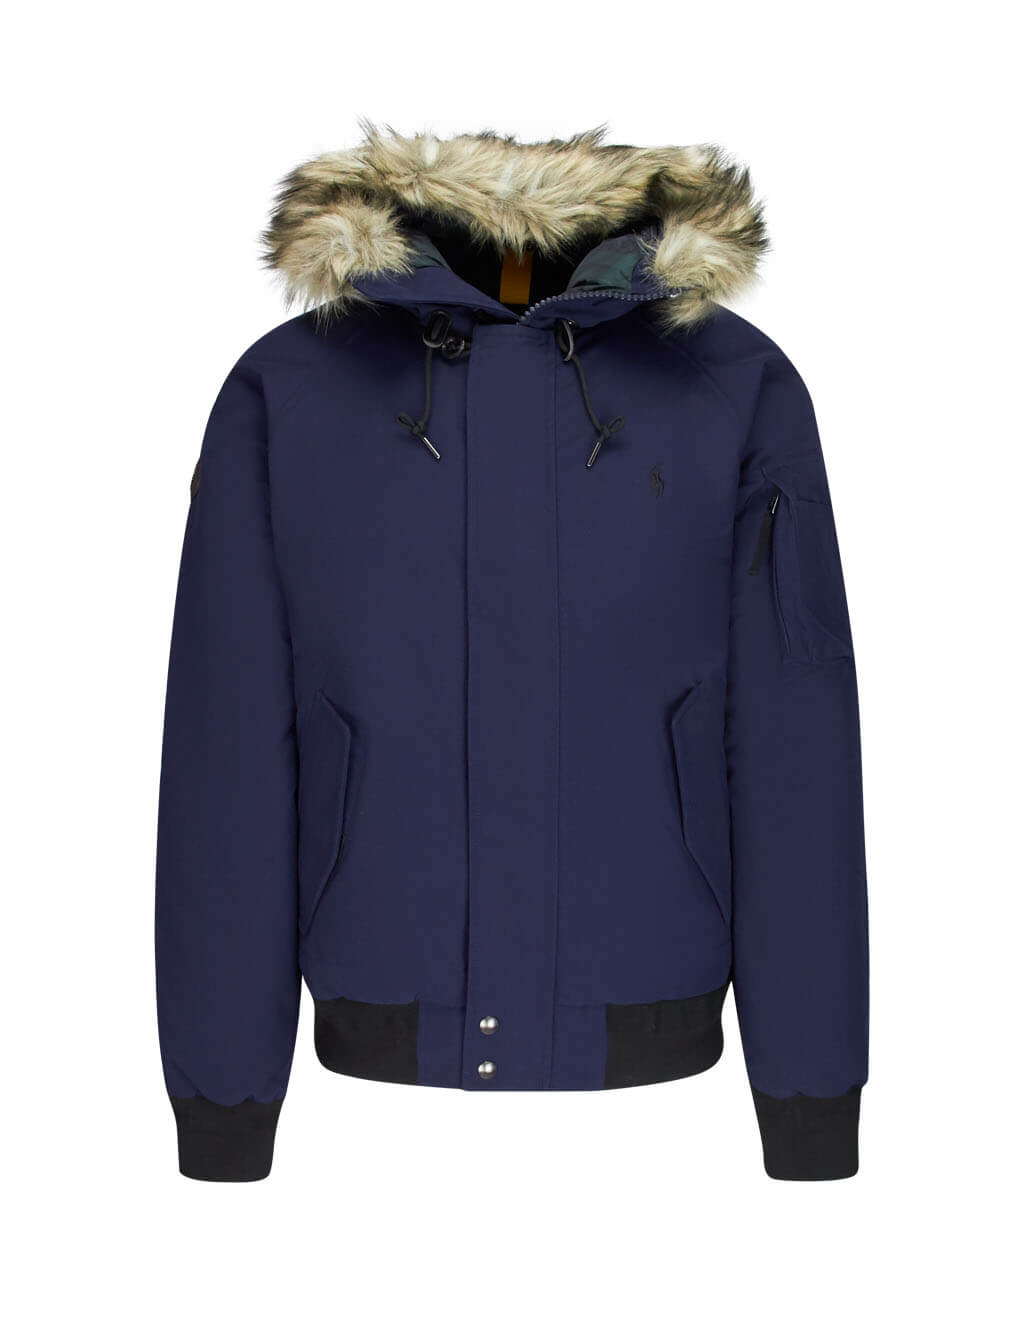 polo jacket with fur